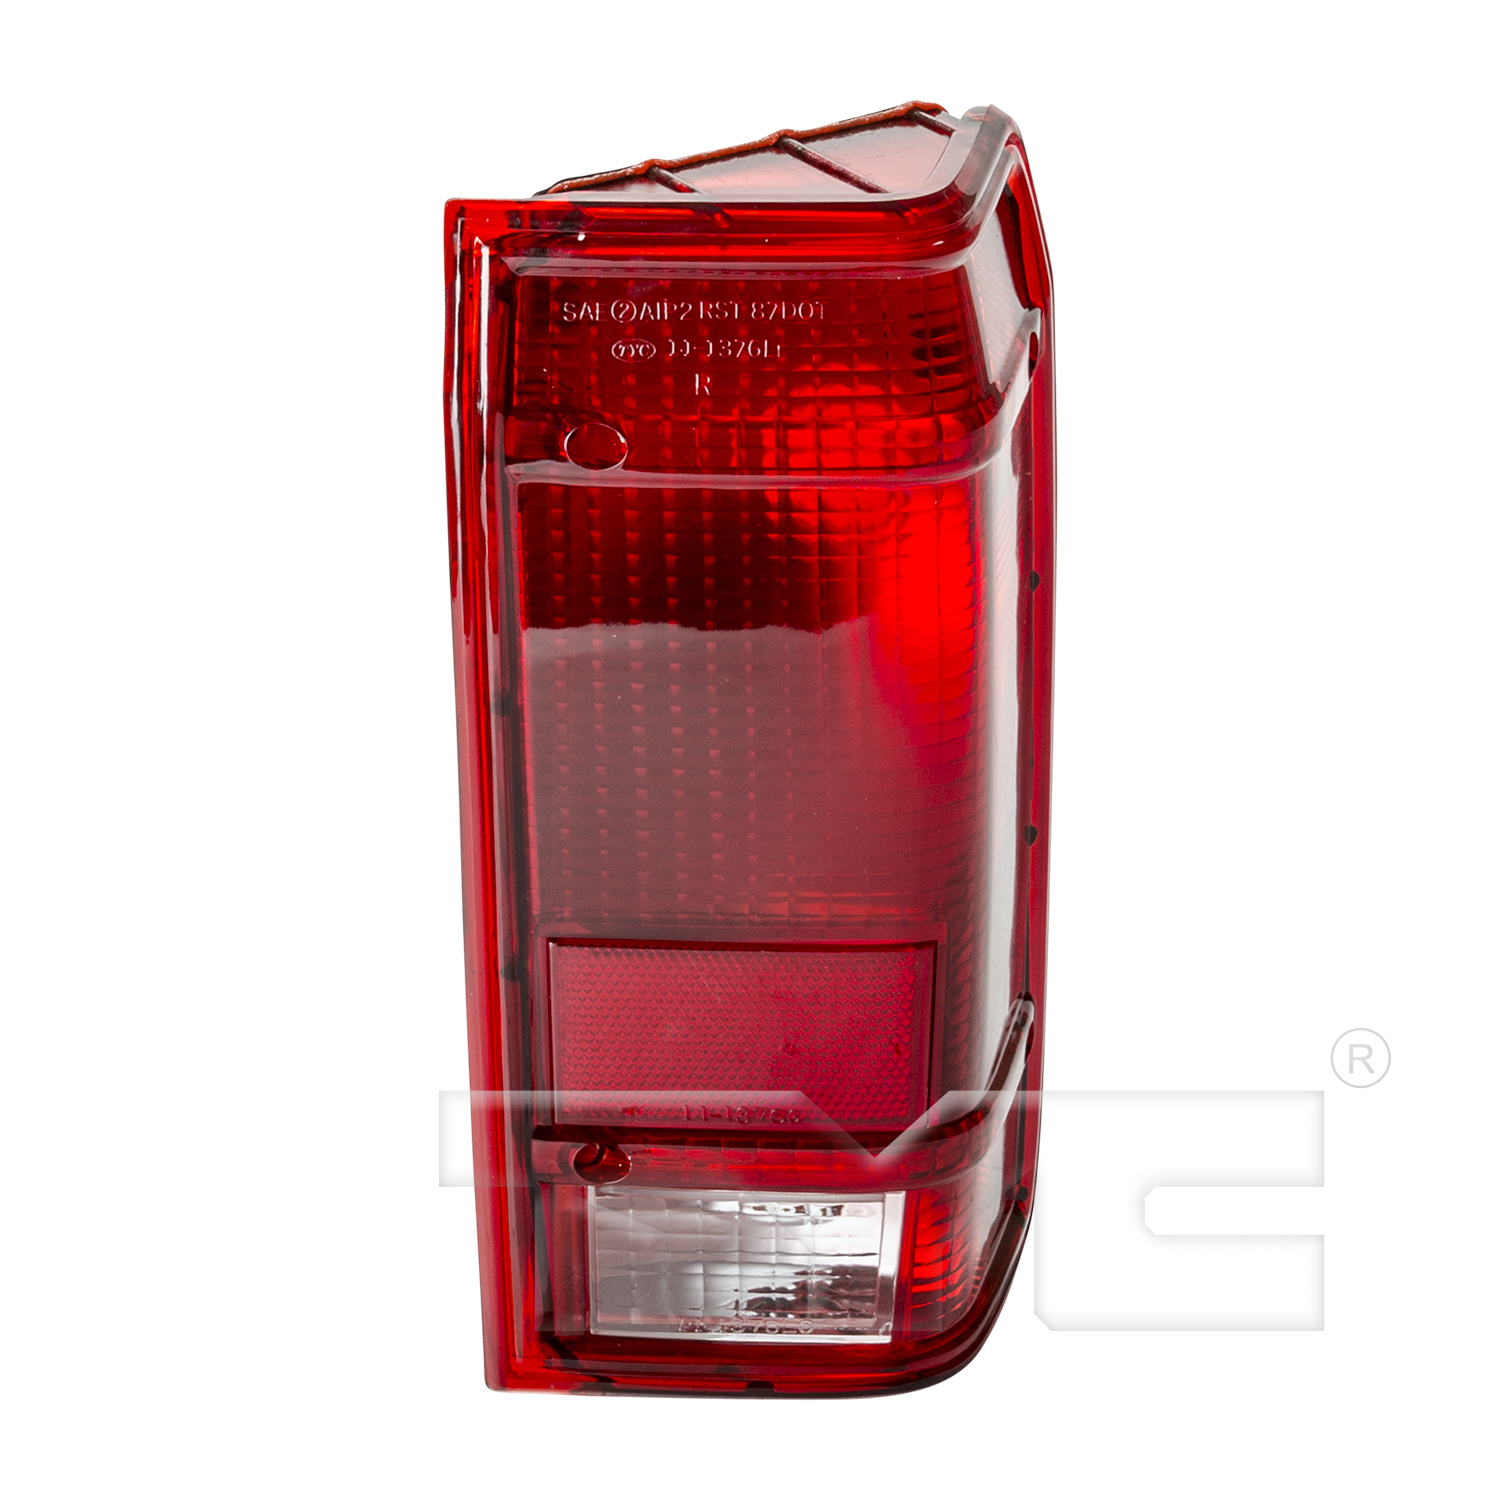 Aftermarket TAILLIGHTS for FORD - RANGER, RANGER,91-92,RT Taillamp assy